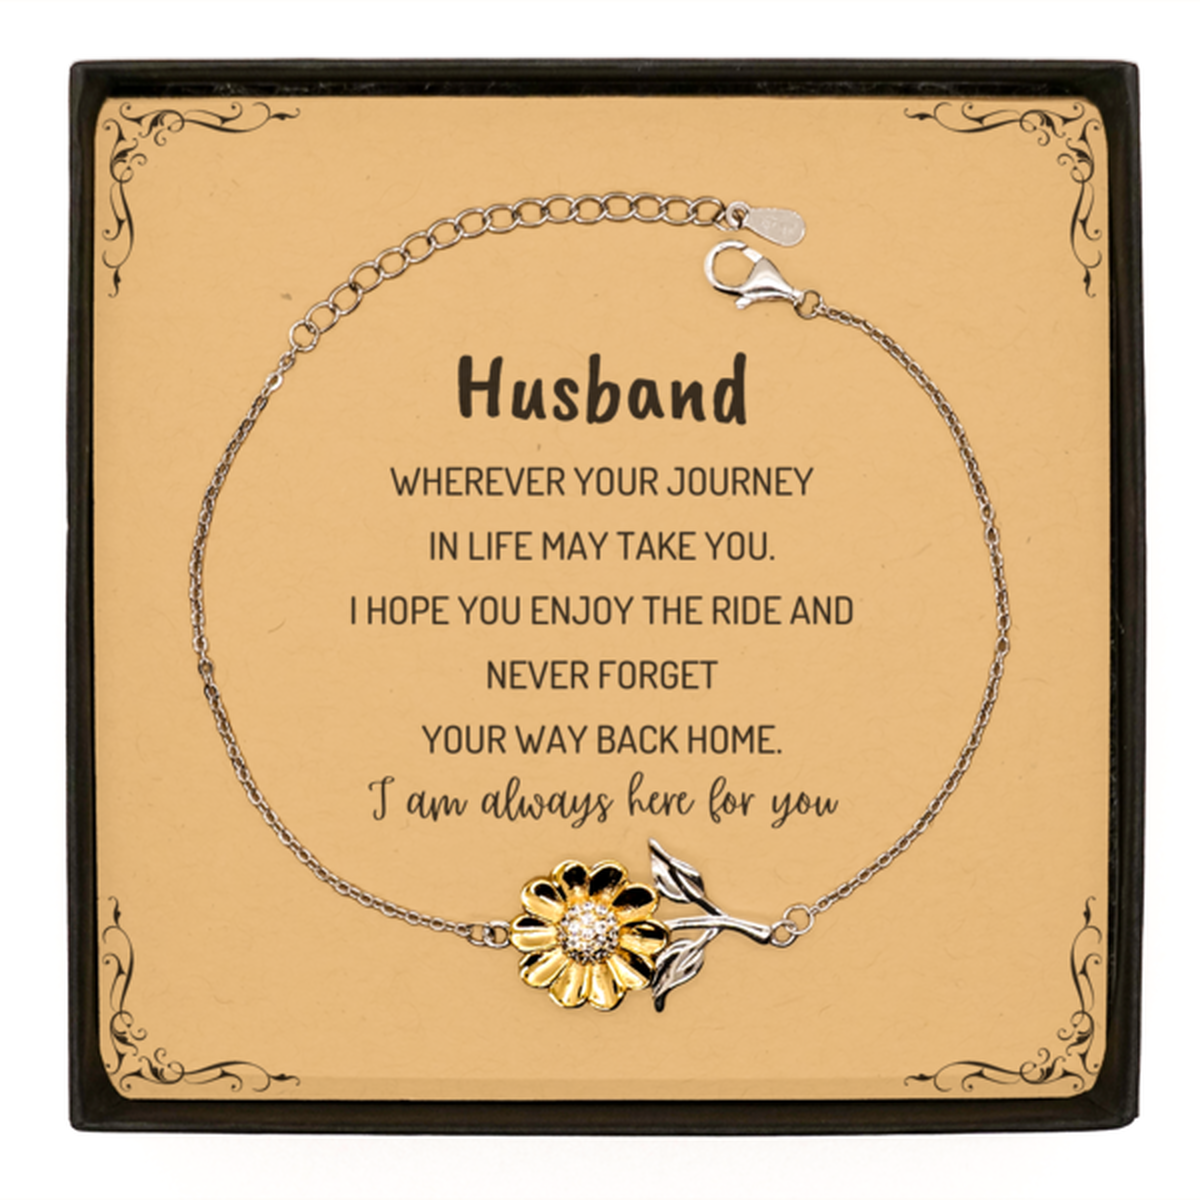 Husband wherever your journey in life may take you, I am always here for you Husband Sunflower Bracelet, Awesome Christmas Gifts For Husband Message Card, Husband Birthday Gifts for Men Women Family Loved One